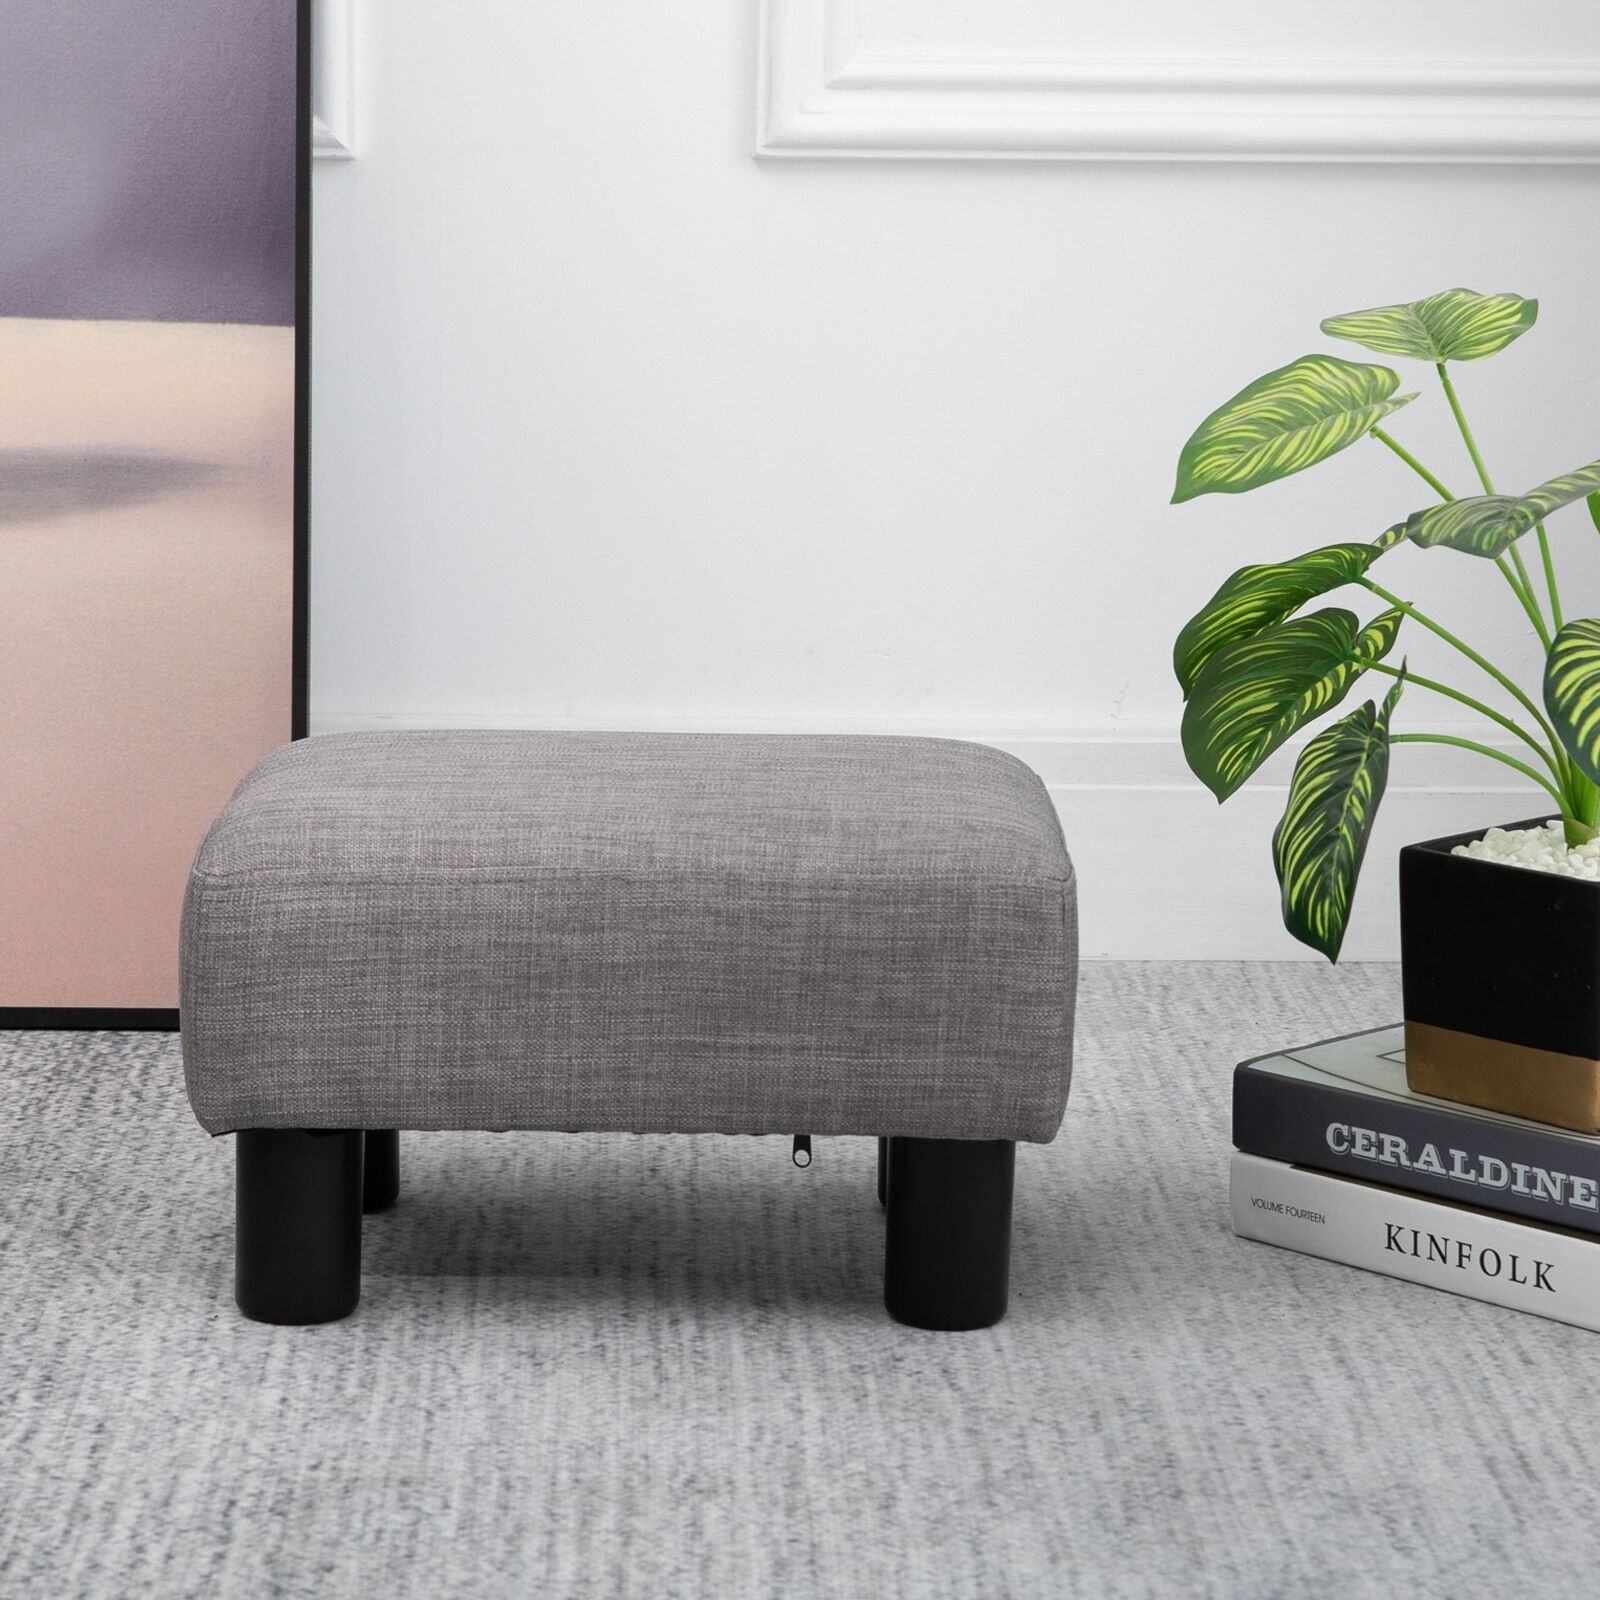 Small footstool in a neutral color